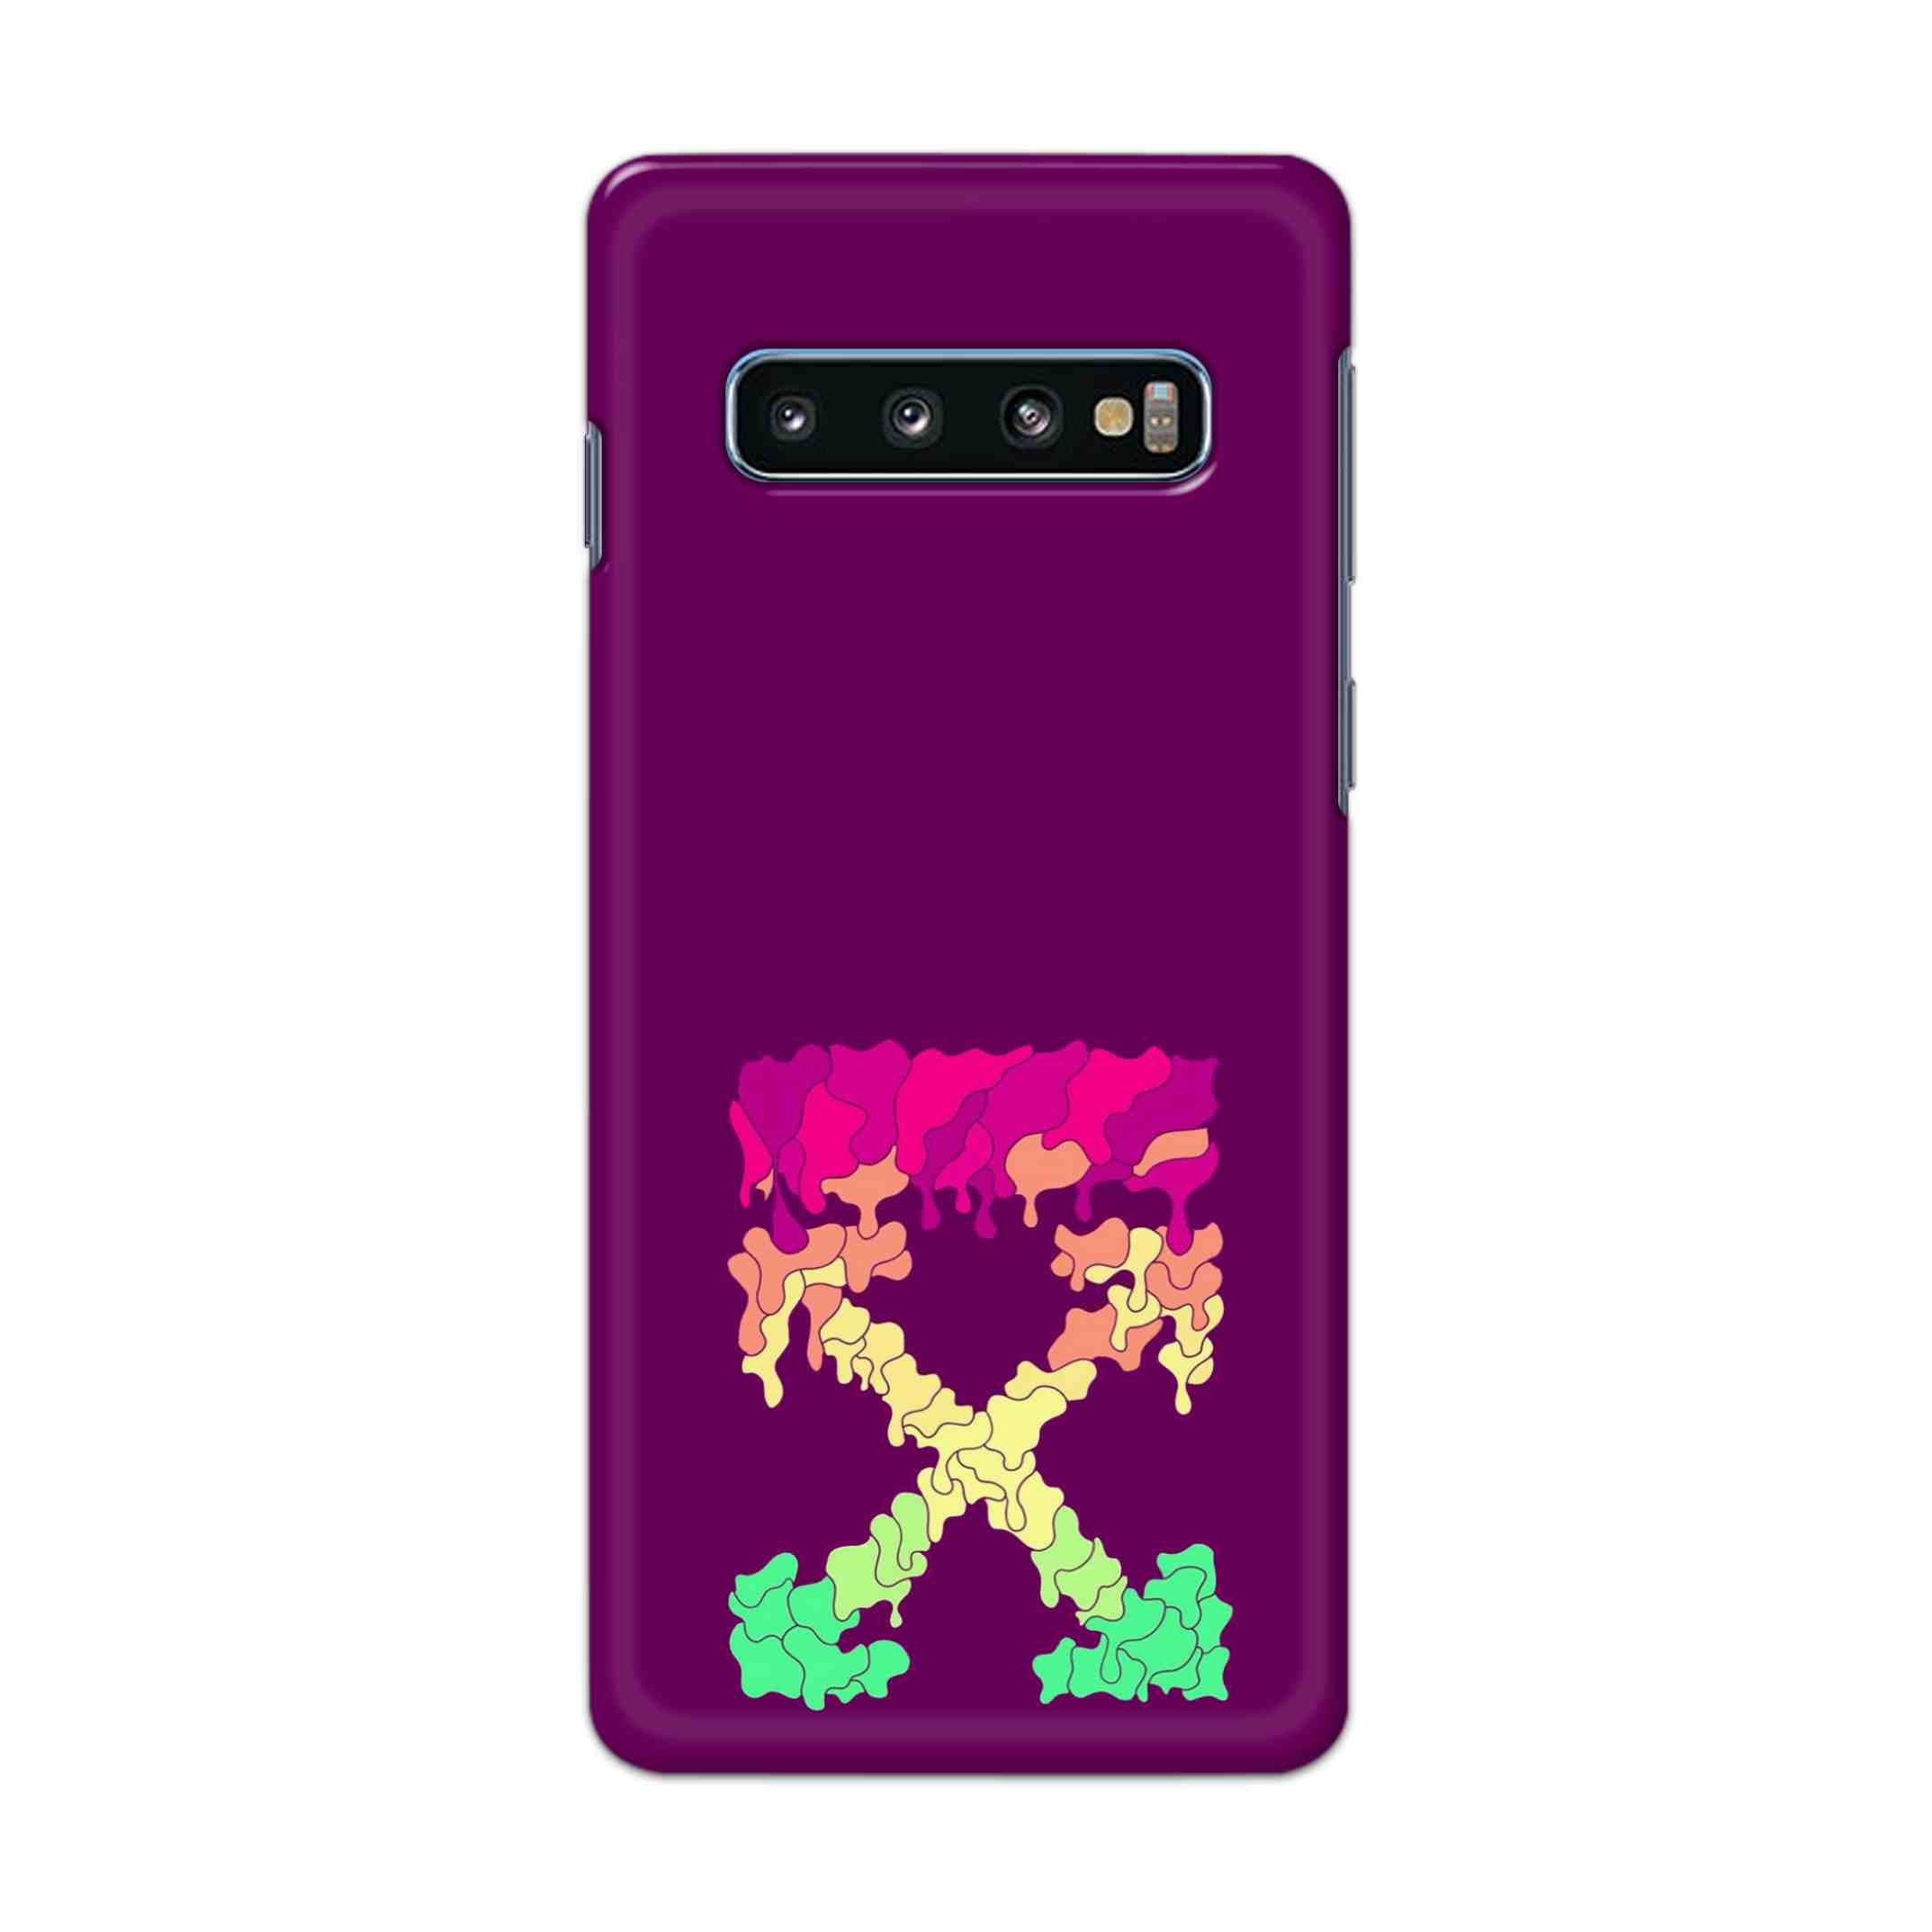 Buy X.O Hard Back Mobile Phone Case Cover For Samsung Galaxy S10 Plus Online